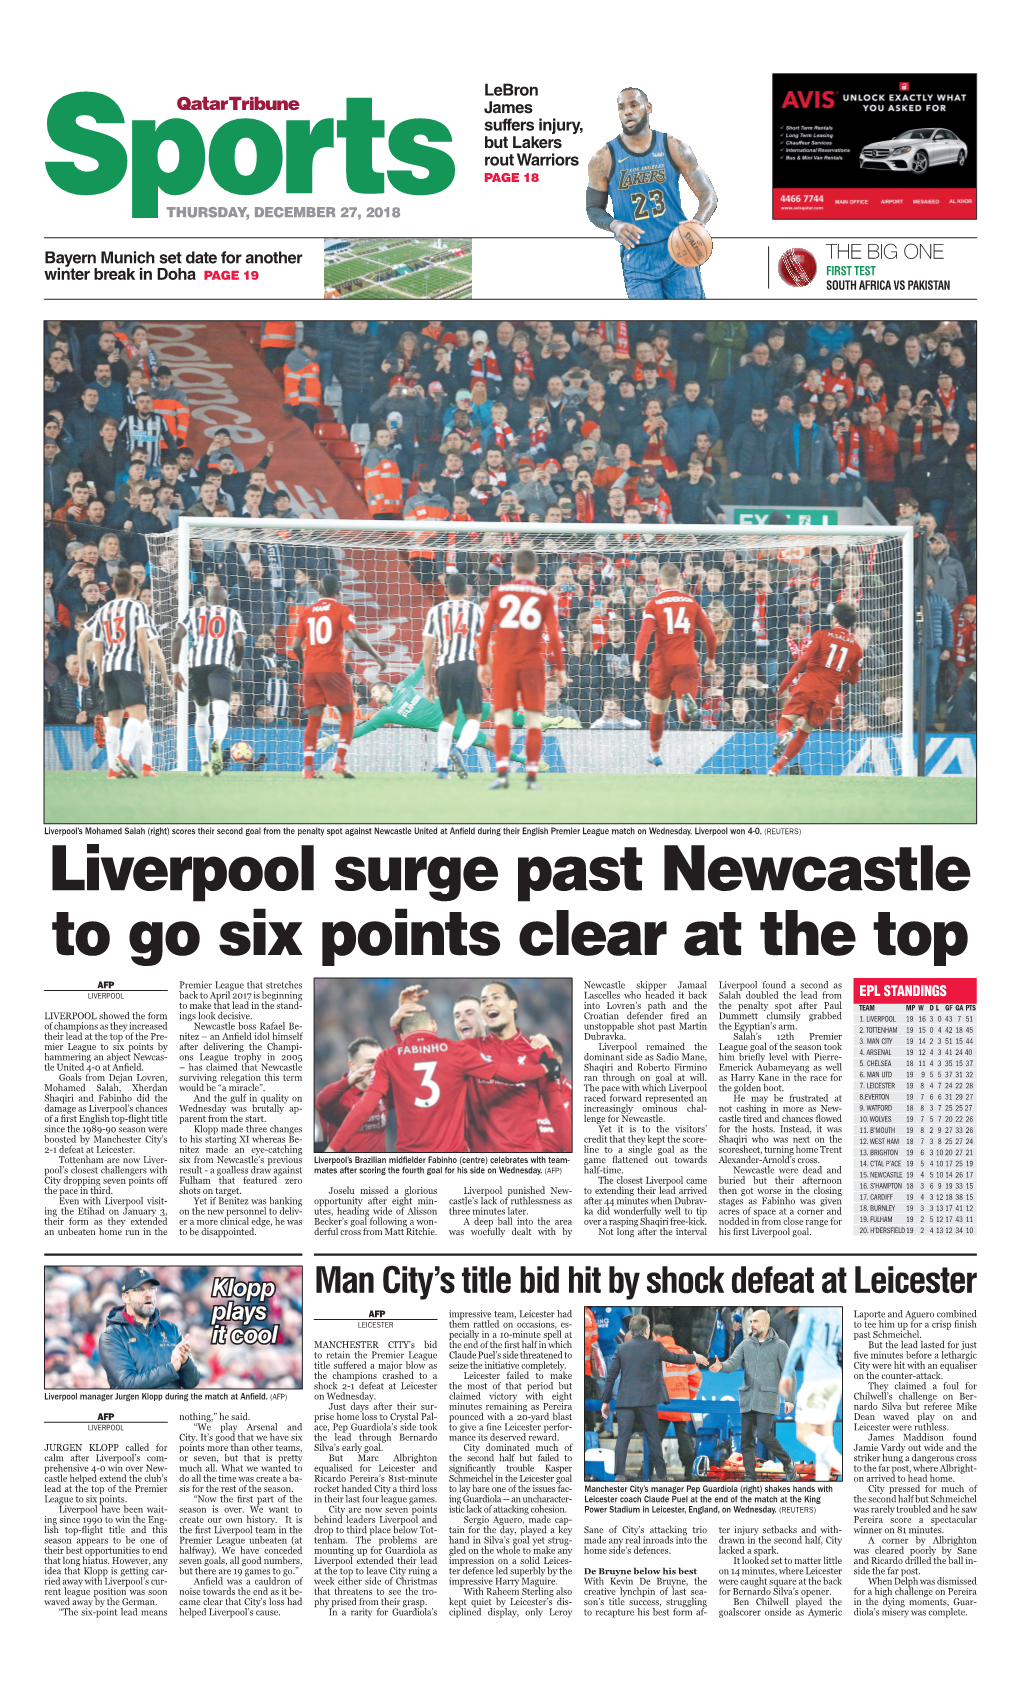 Liverpool Surge Past Newcastle to Go Six Points Clear at the Top